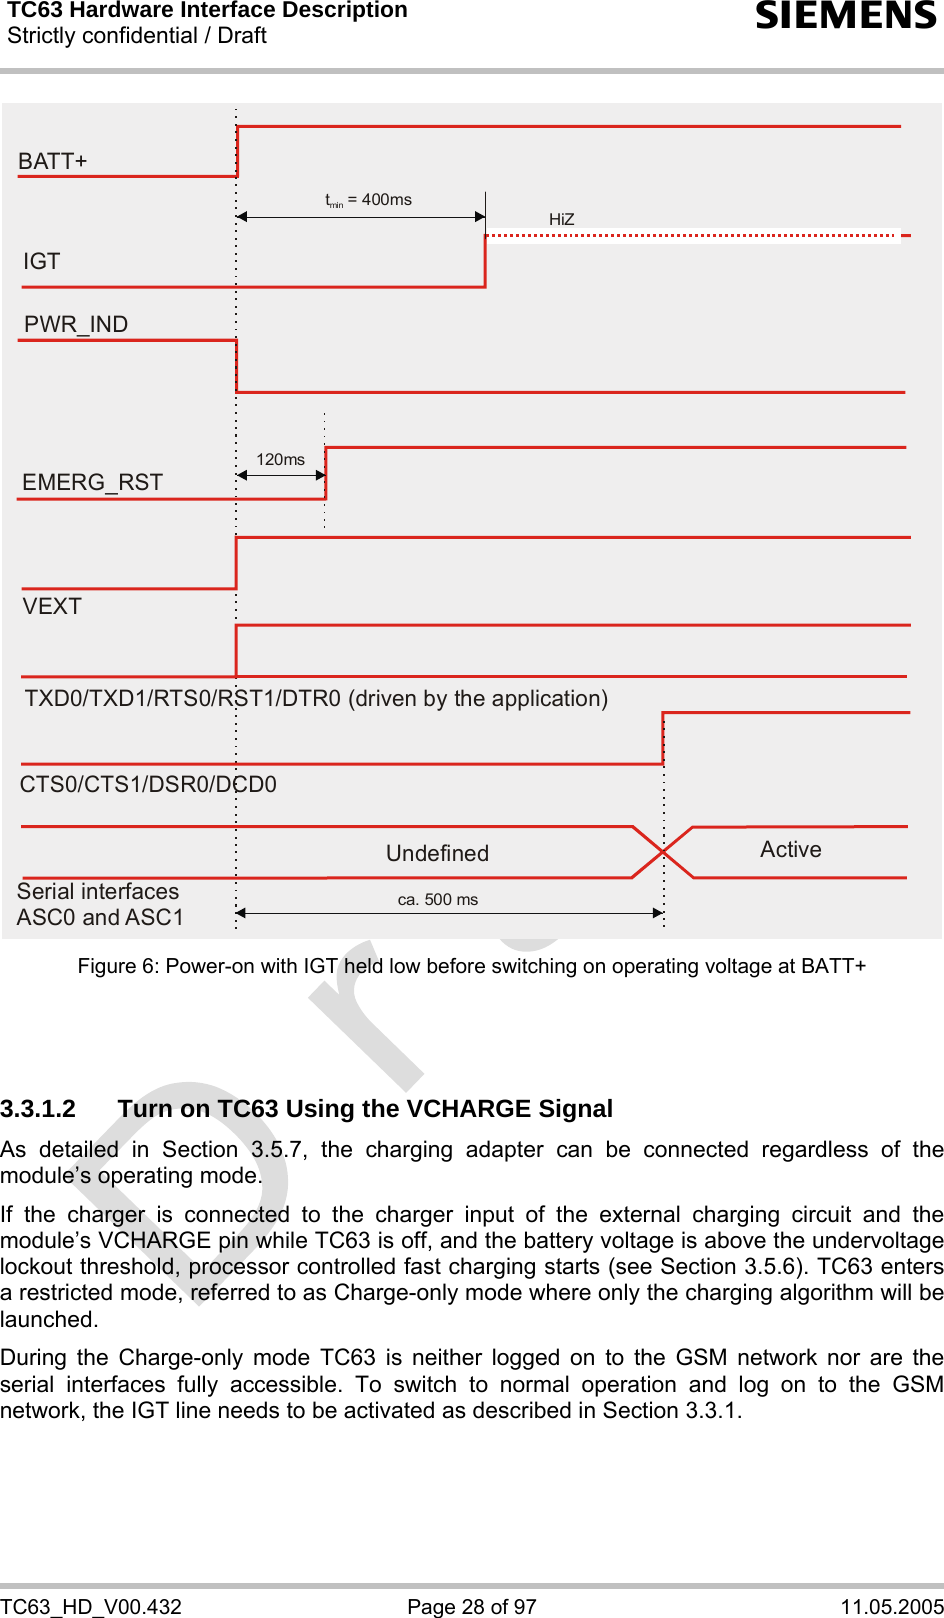 TC63 Hardware Interface Description Strictly confidential / Draft  s TC63_HD_V00.432  Page 28 of 97  11.05.2005 EMERG_RSTPWR_INDt  = 400msmin120msBATT+IGTHiZVEXTTXD0/TXD1/RTS0/RST1/DTR0 (driven by the application)CTS0/CTS1/DSR0/DCD0ca. 500 msSerial interfacesASC0 and ASC1Undefined Active Figure 6: Power-on with IGT held low before switching on operating voltage at BATT+    3.3.1.2  Turn on TC63 Using the VCHARGE Signal As detailed in Section 3.5.7, the charging adapter can be connected regardless of the module’s operating mode. If the charger is connected to the charger input of the external charging circuit and the module’s VCHARGE pin while TC63 is off, and the battery voltage is above the undervoltage lockout threshold, processor controlled fast charging starts (see Section 3.5.6). TC63 enters a restricted mode, referred to as Charge-only mode where only the charging algorithm will be launched. During the Charge-only mode TC63 is neither logged on to the GSM network nor are the serial interfaces fully accessible. To switch to normal operation and log on to the GSM network, the IGT line needs to be activated as described in Section 3.3.1.   